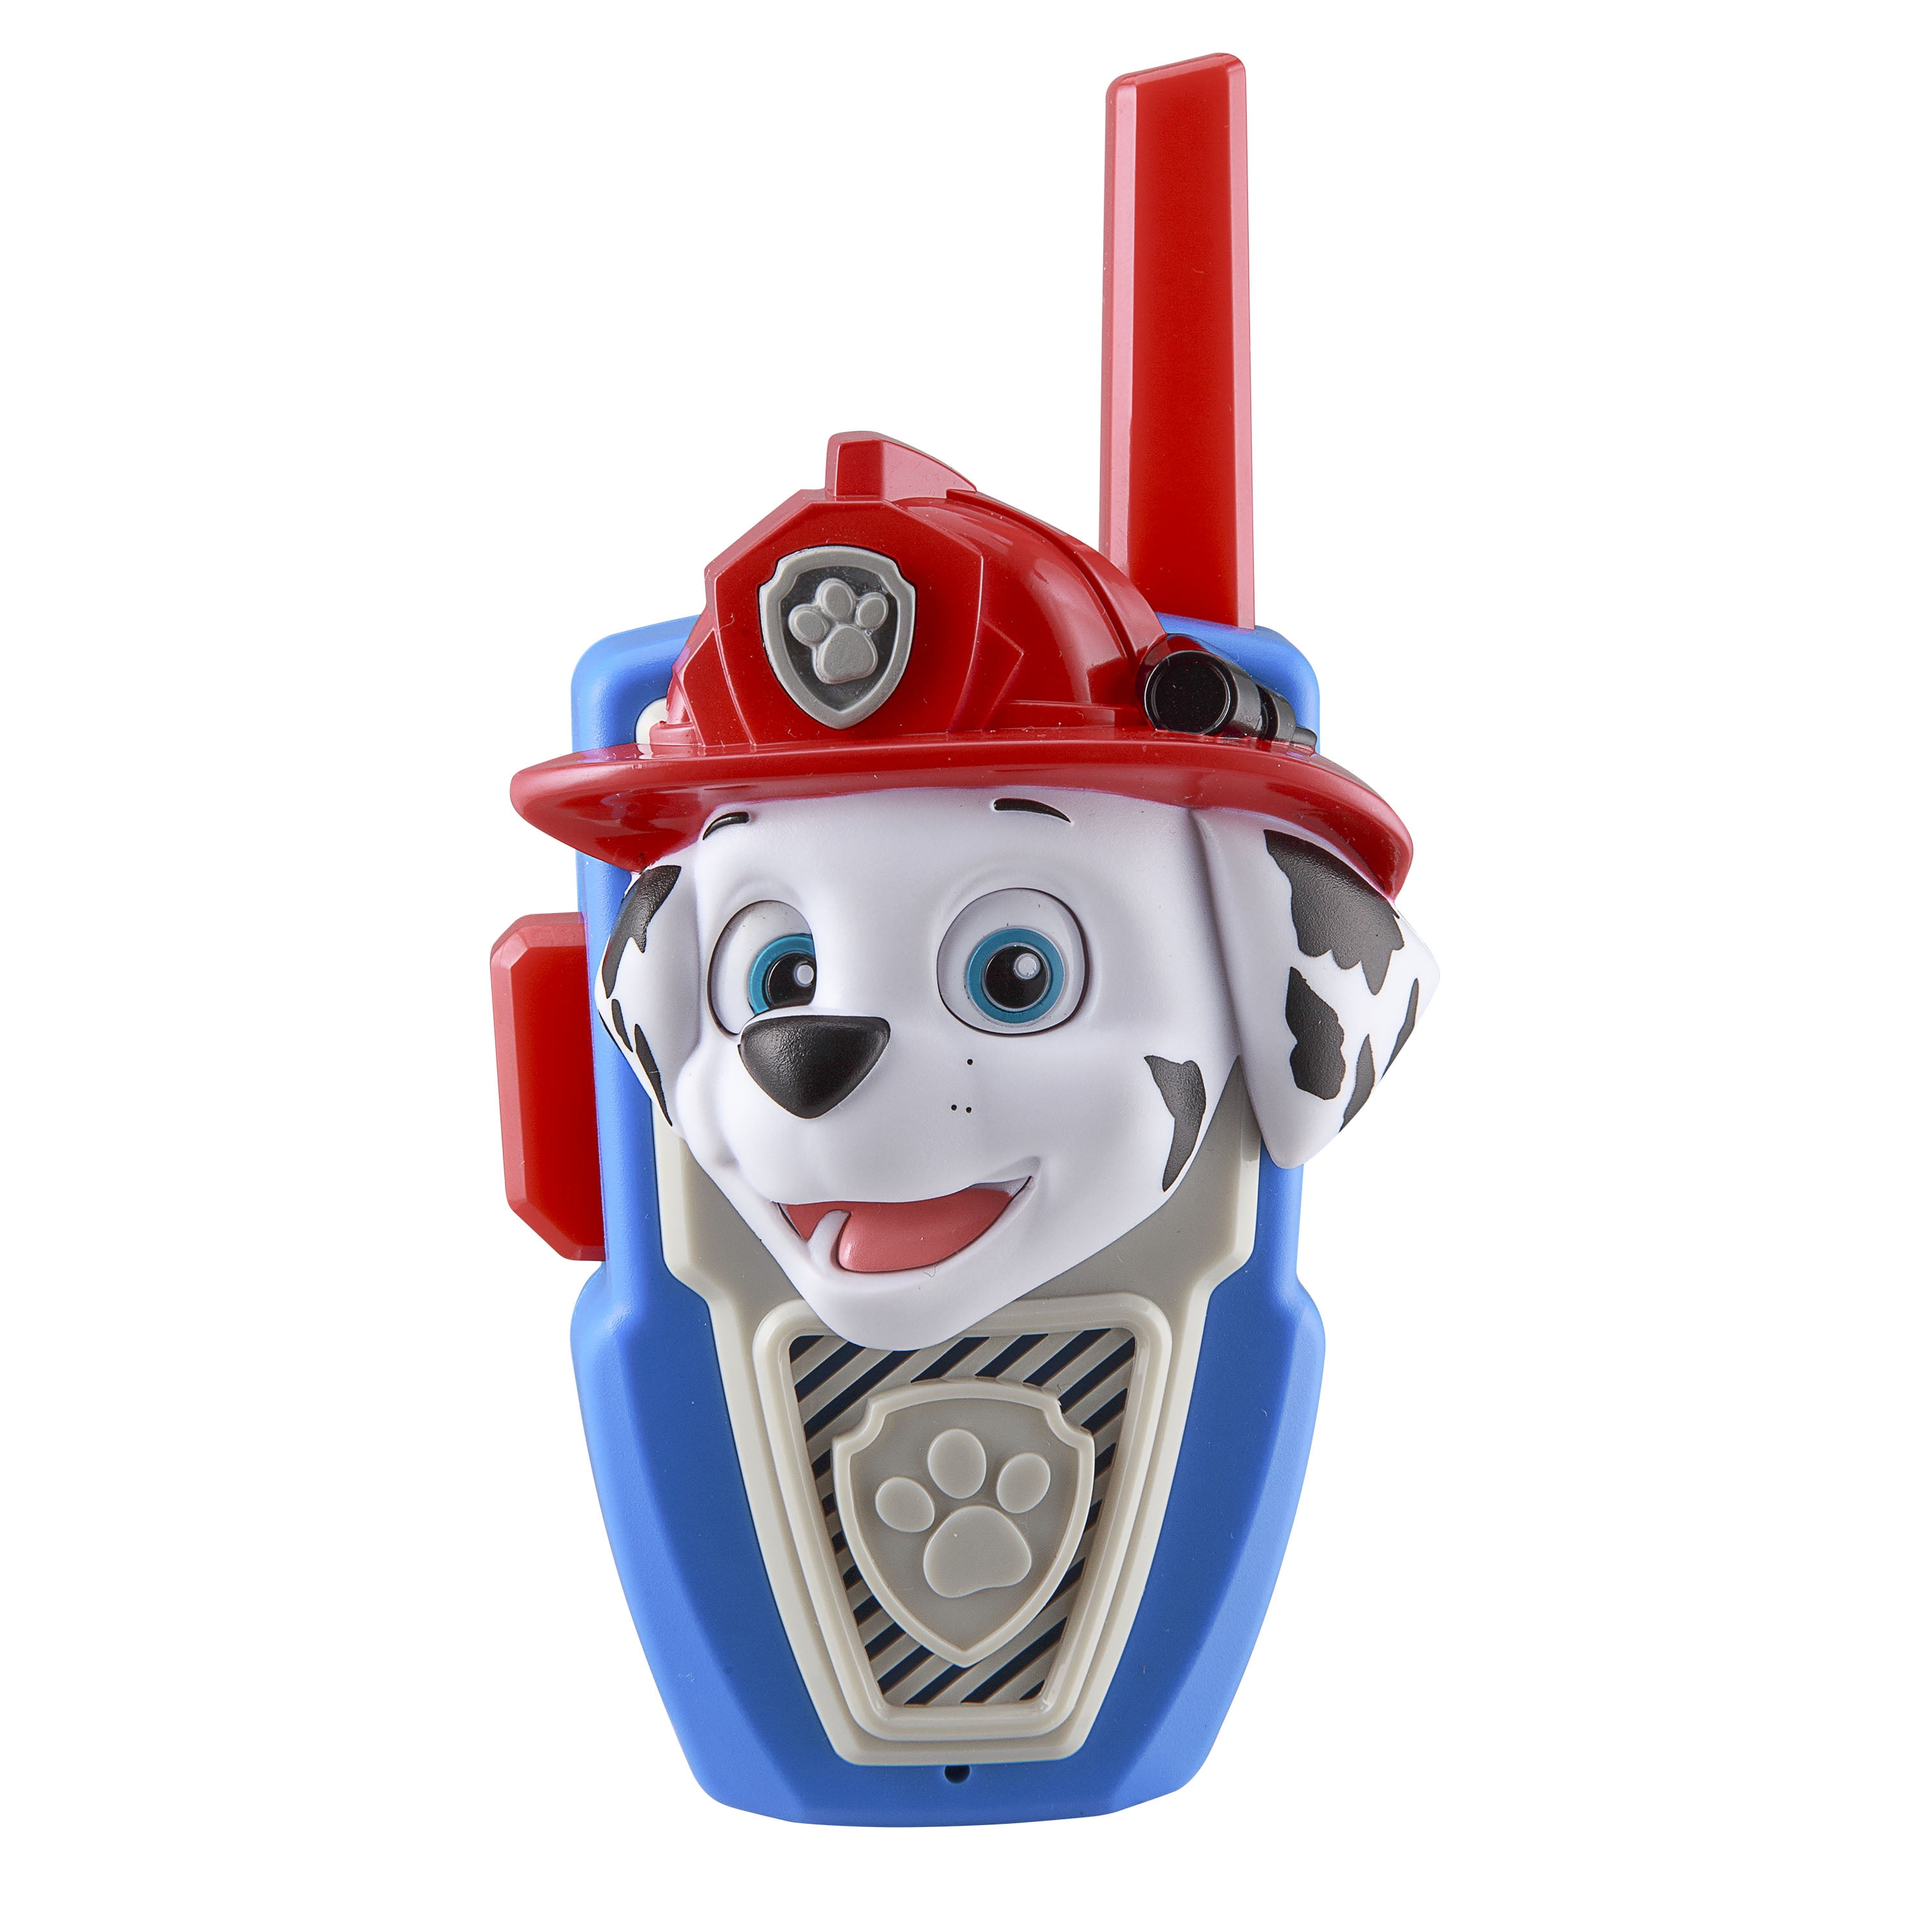 Paw Patrol Chase and Marshall Character Walkie Talkies Radio by EKids NEW! 